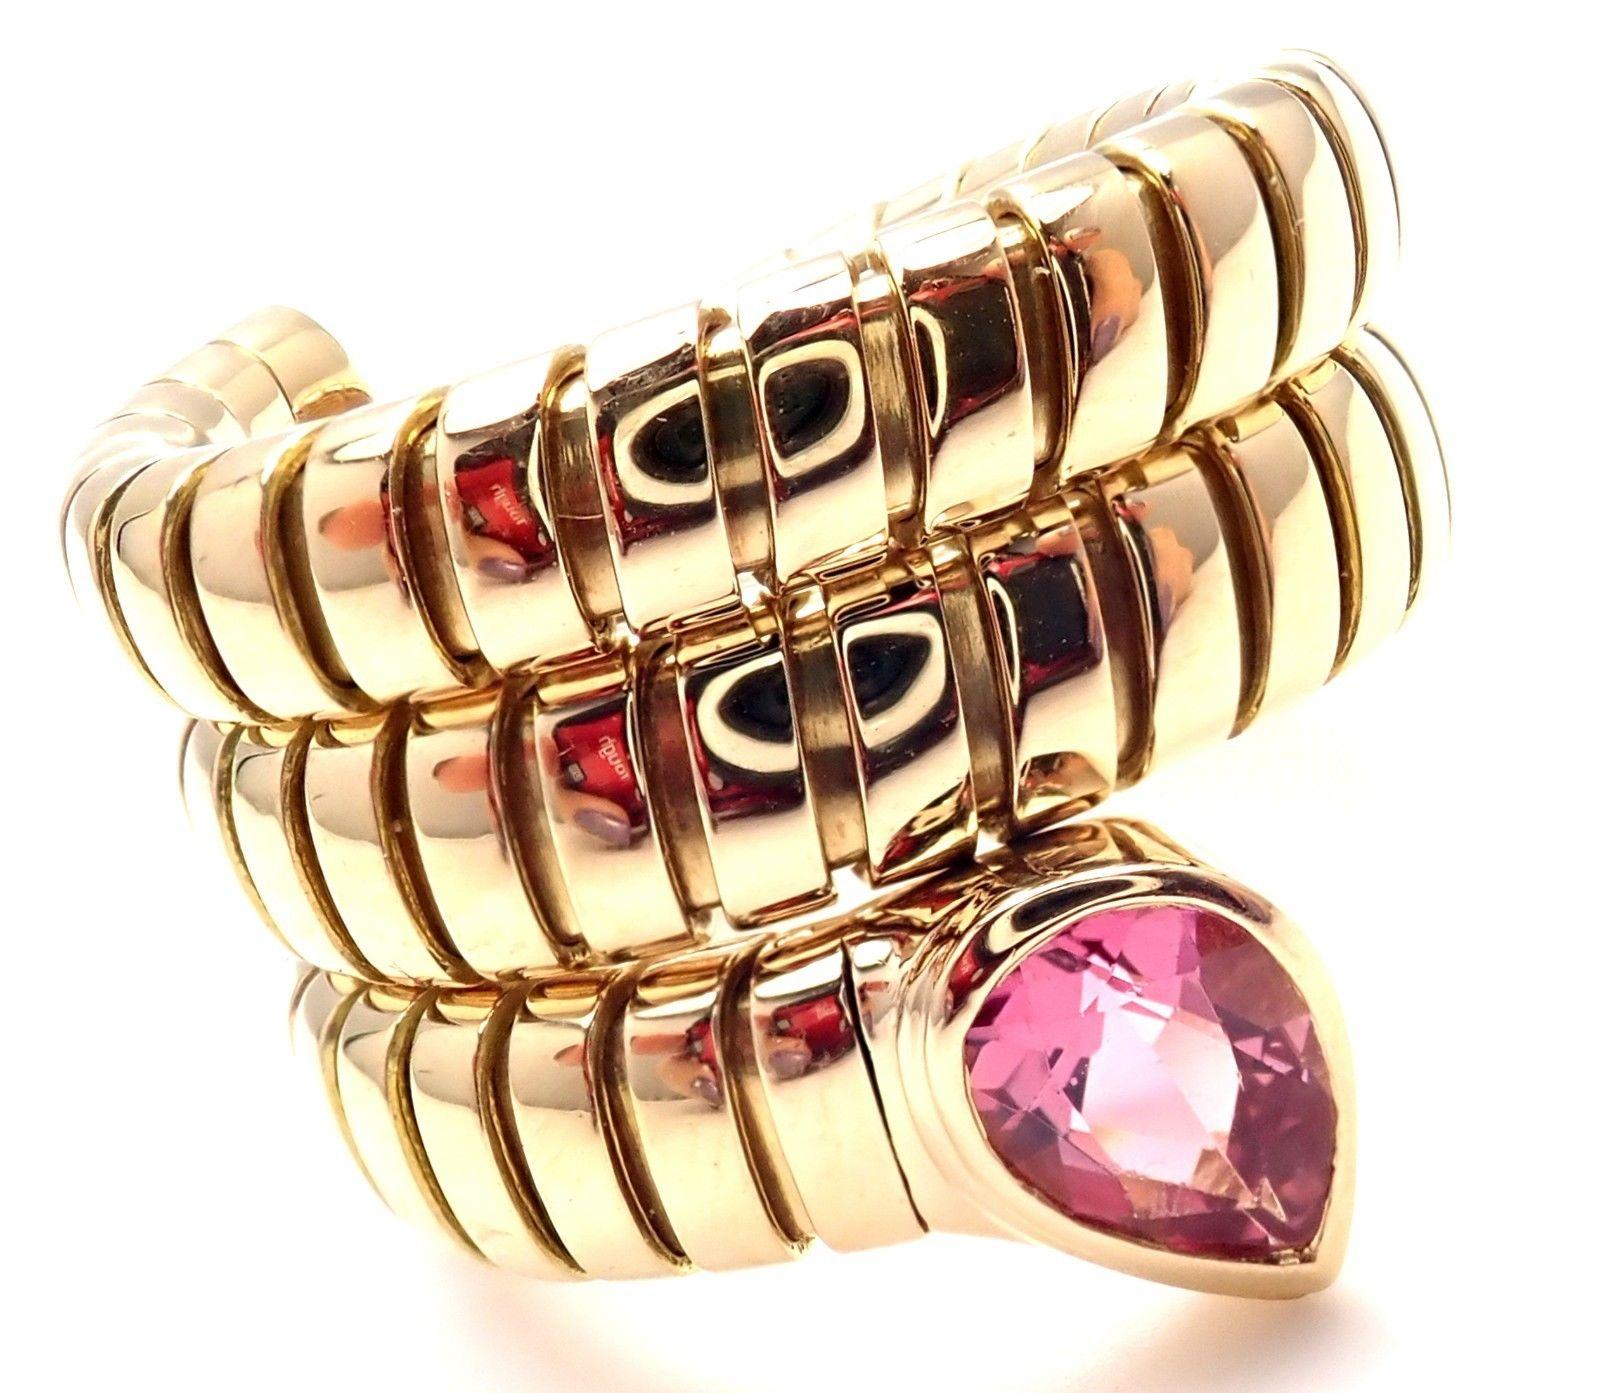 18k Yellow Gold Pink Tourmaline Coil Snake Band Ring by Bulgari. 
With 1 pear shape pink tourmaline stone: 6mm x 4mm.
Details:
Ring Size: 6-6.5 (the ring stretches)
Width: 18mm
Weight: 14.5 grams
Stamped Hallmarks: Bvlgari 750 
*Free Shipping within